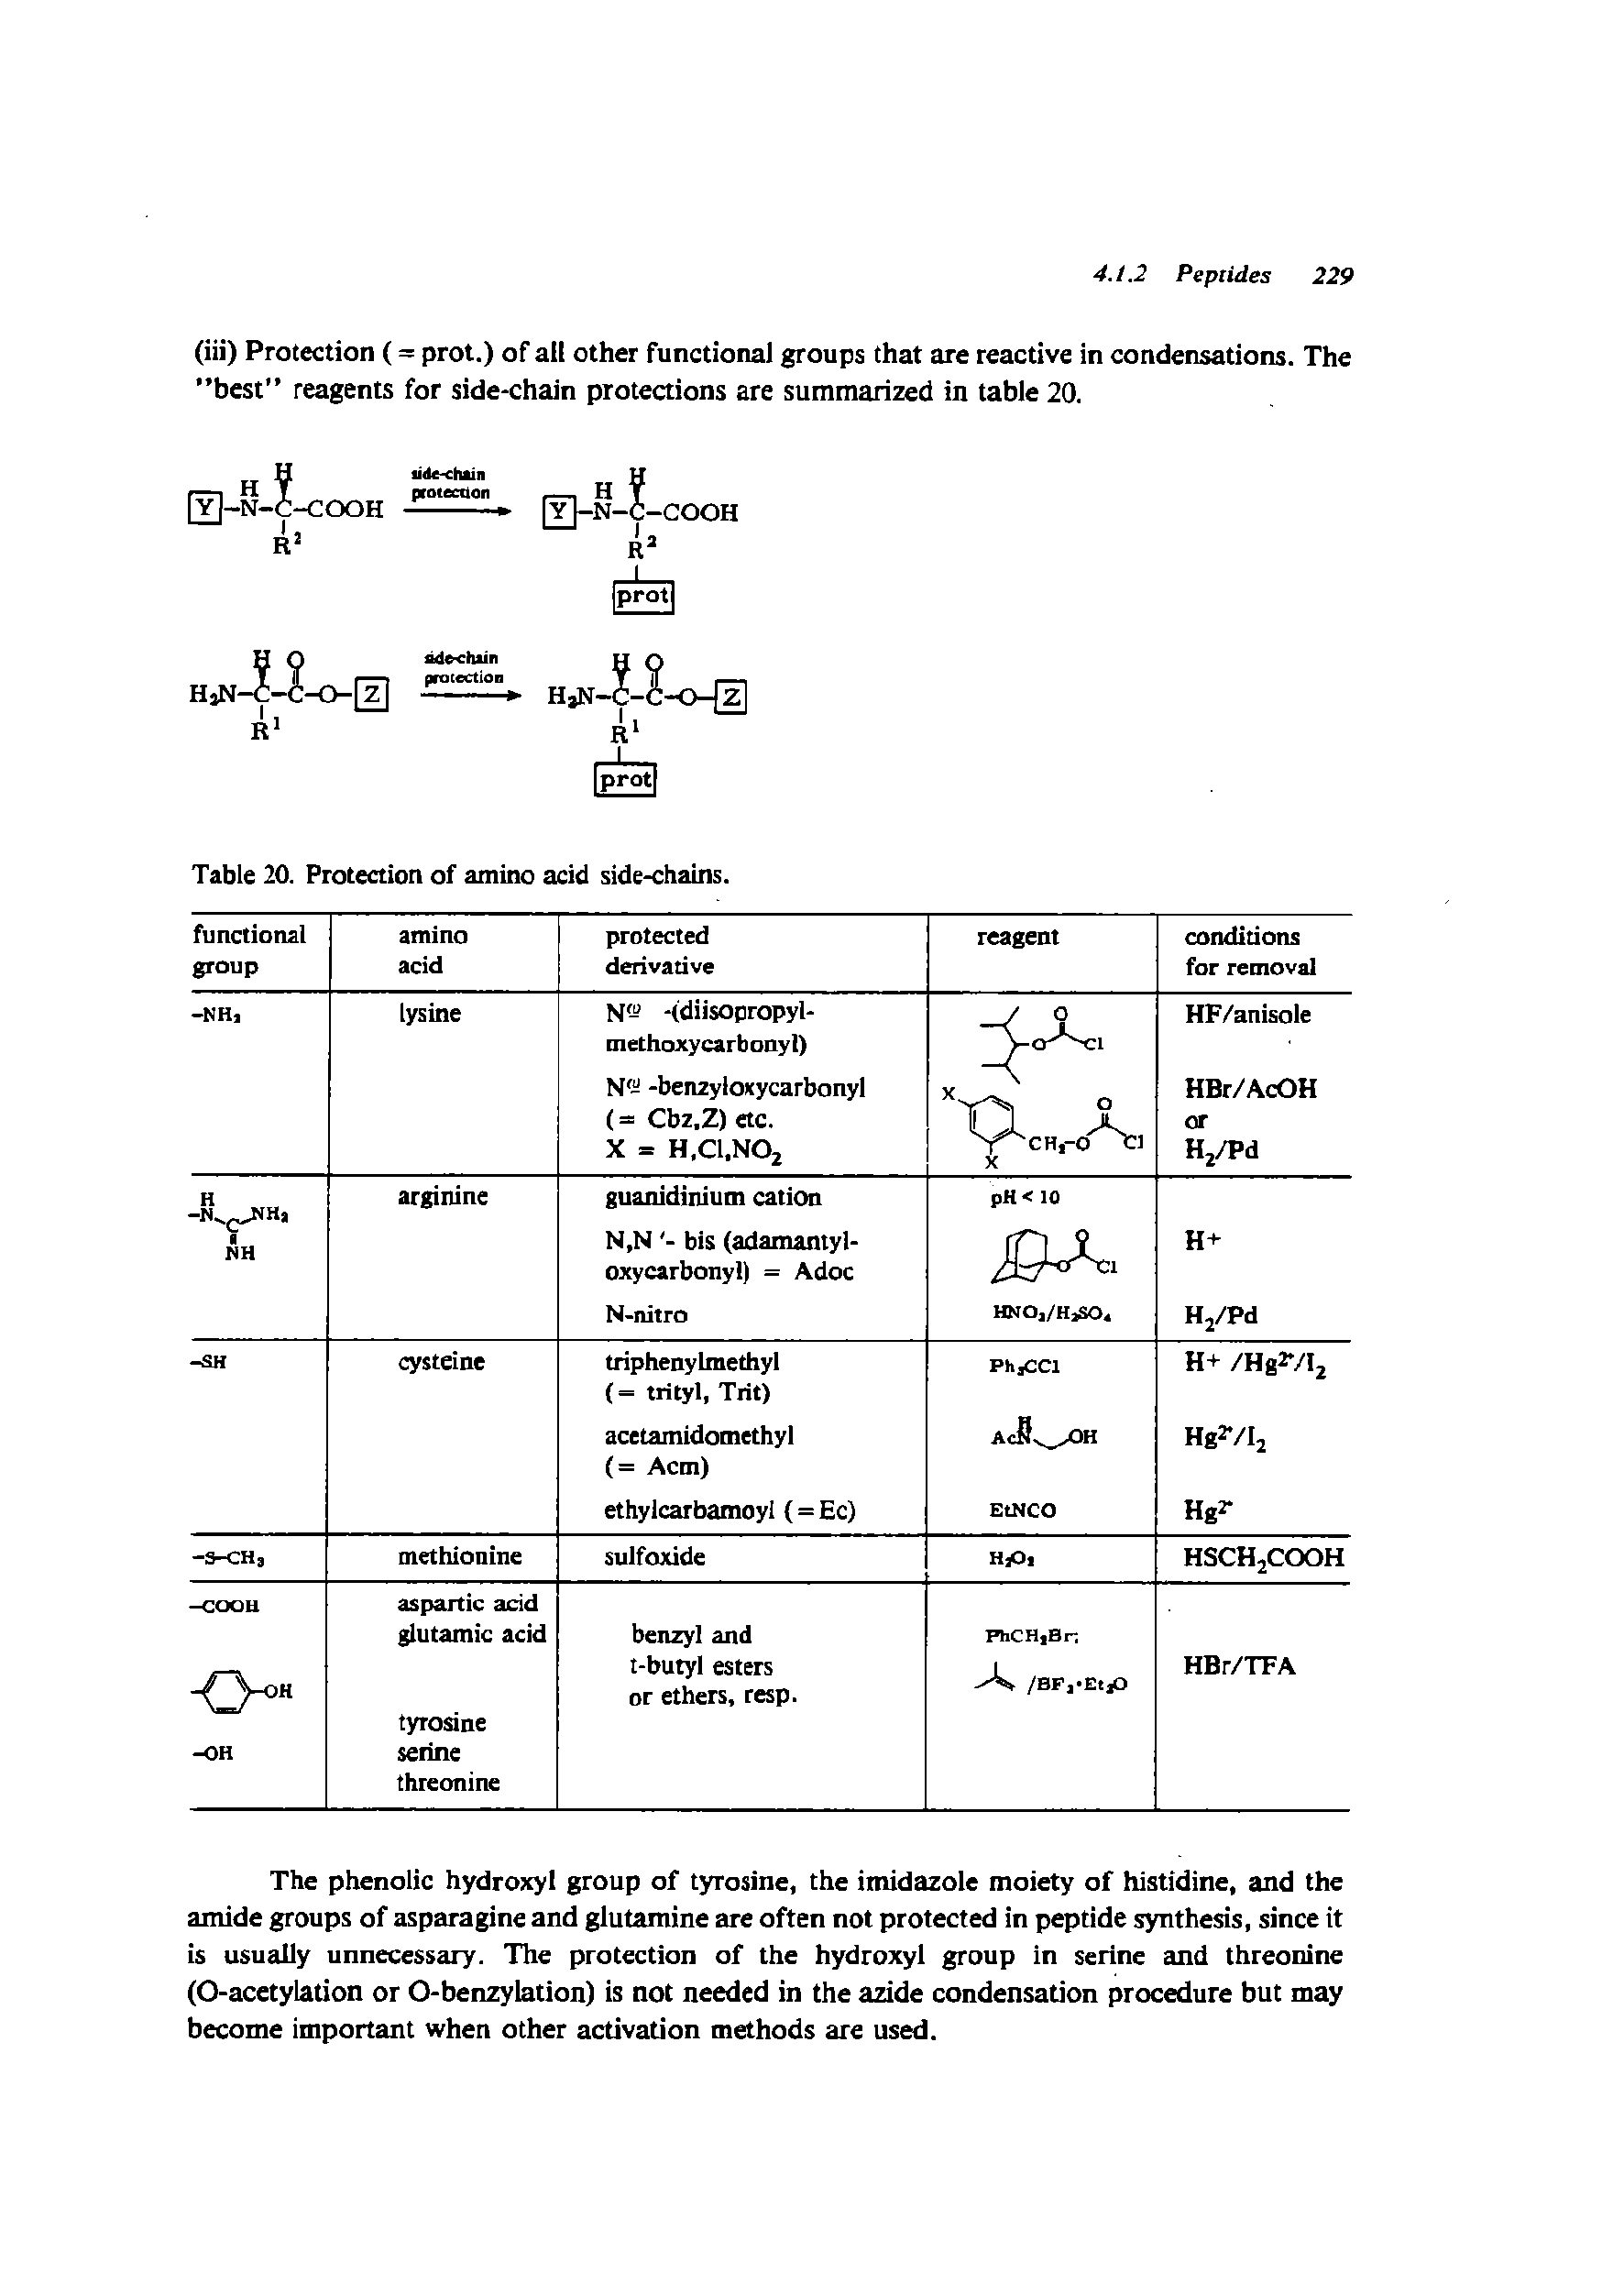 Table 20. Protection of amino acid side-chains.